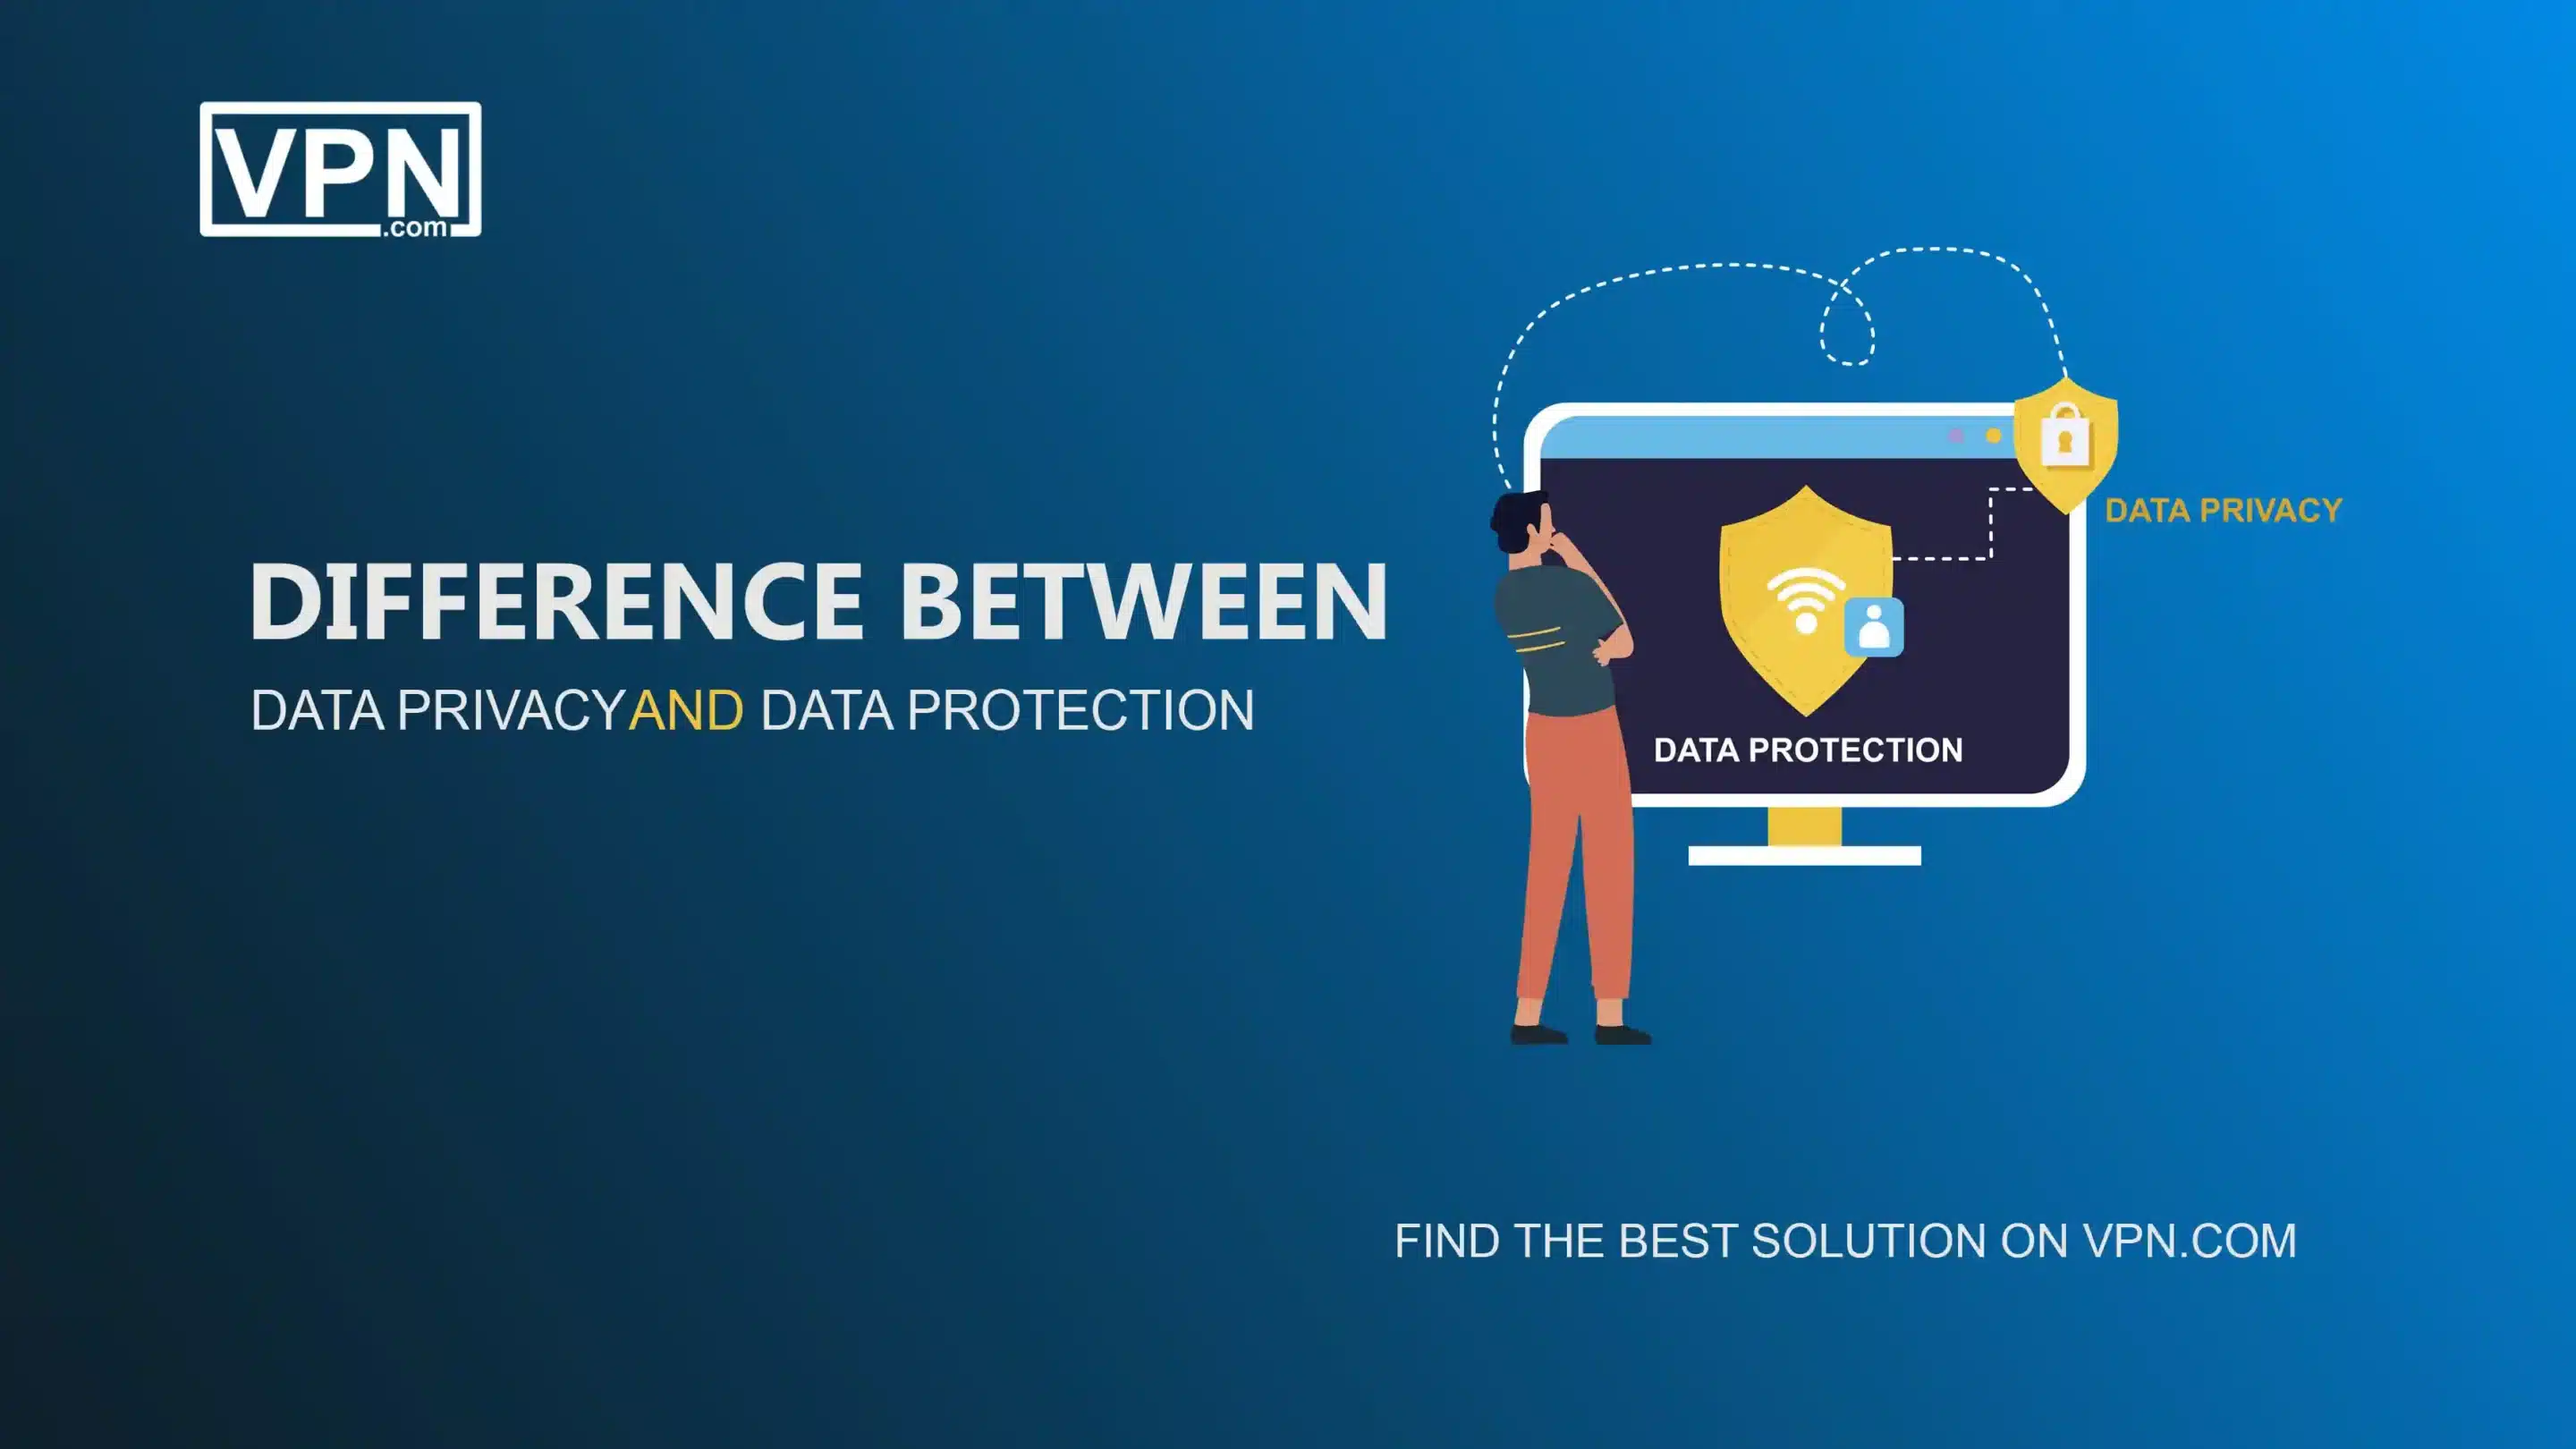 Difference between Data Privacy and Data Protection